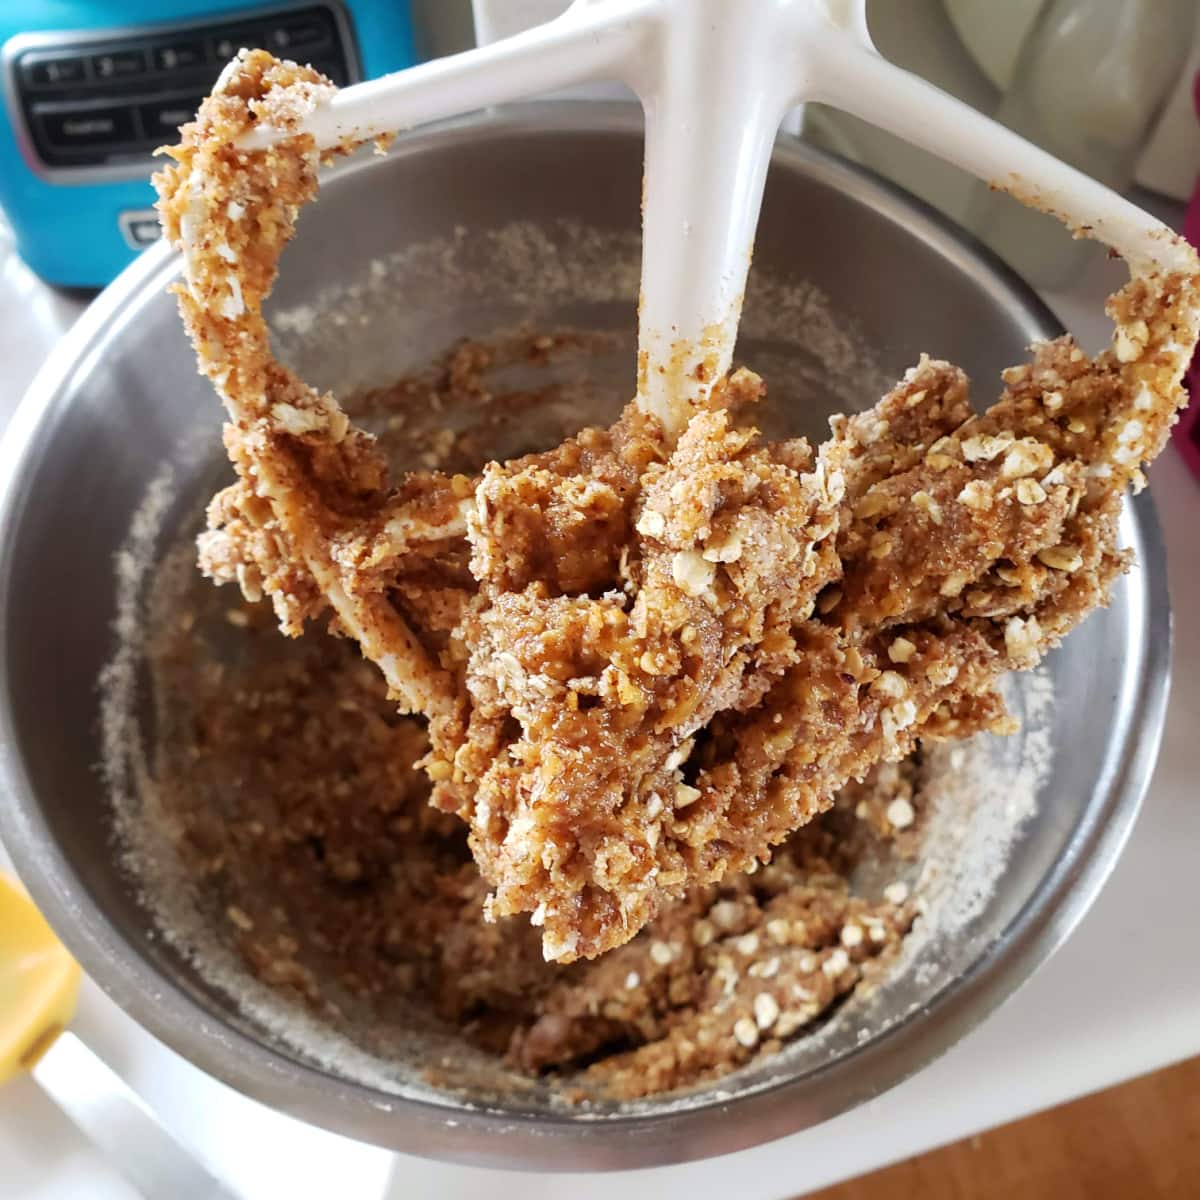 Mix the batter for Roasted Banana Almond Butter Breakfast Cookies